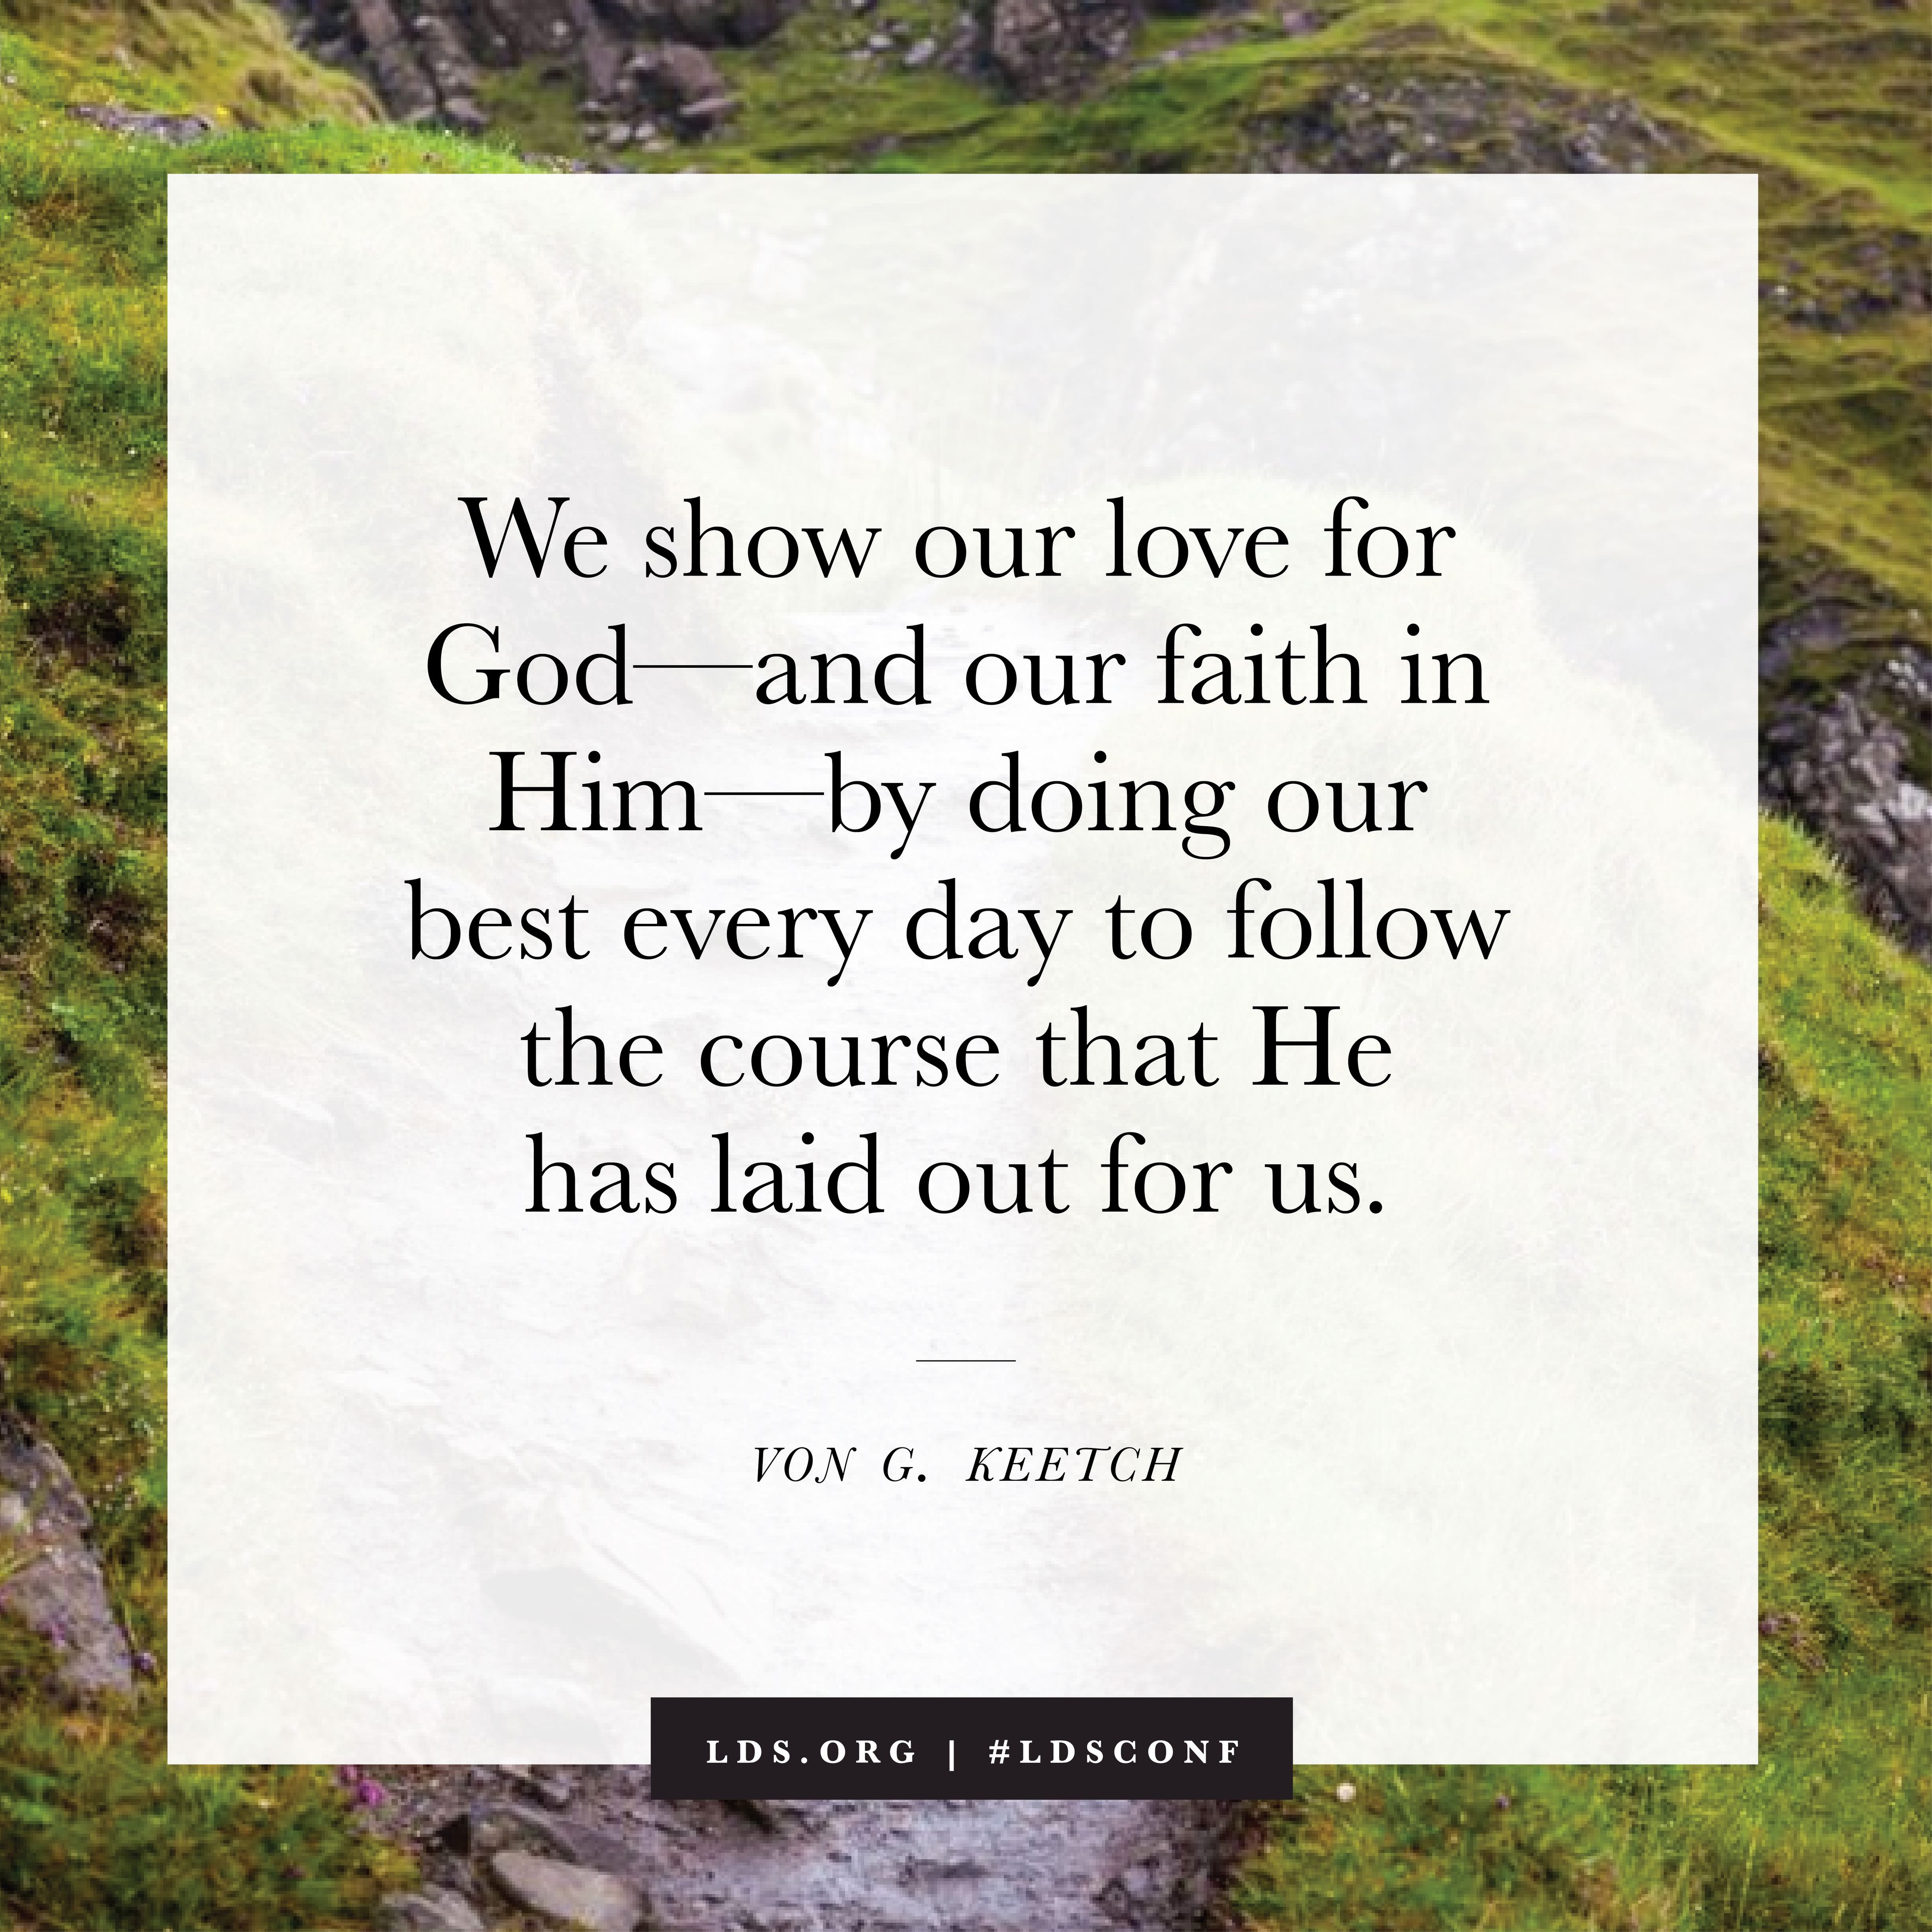 “We show our love for God—and our faith in Him—by doing our very best every day to follow the course that He has laid out for us.” —Elder Von G. Keetch, “Blessed and Happy Are Those Who Keep the Commandments of God” © See Individual Images ipCode 1.